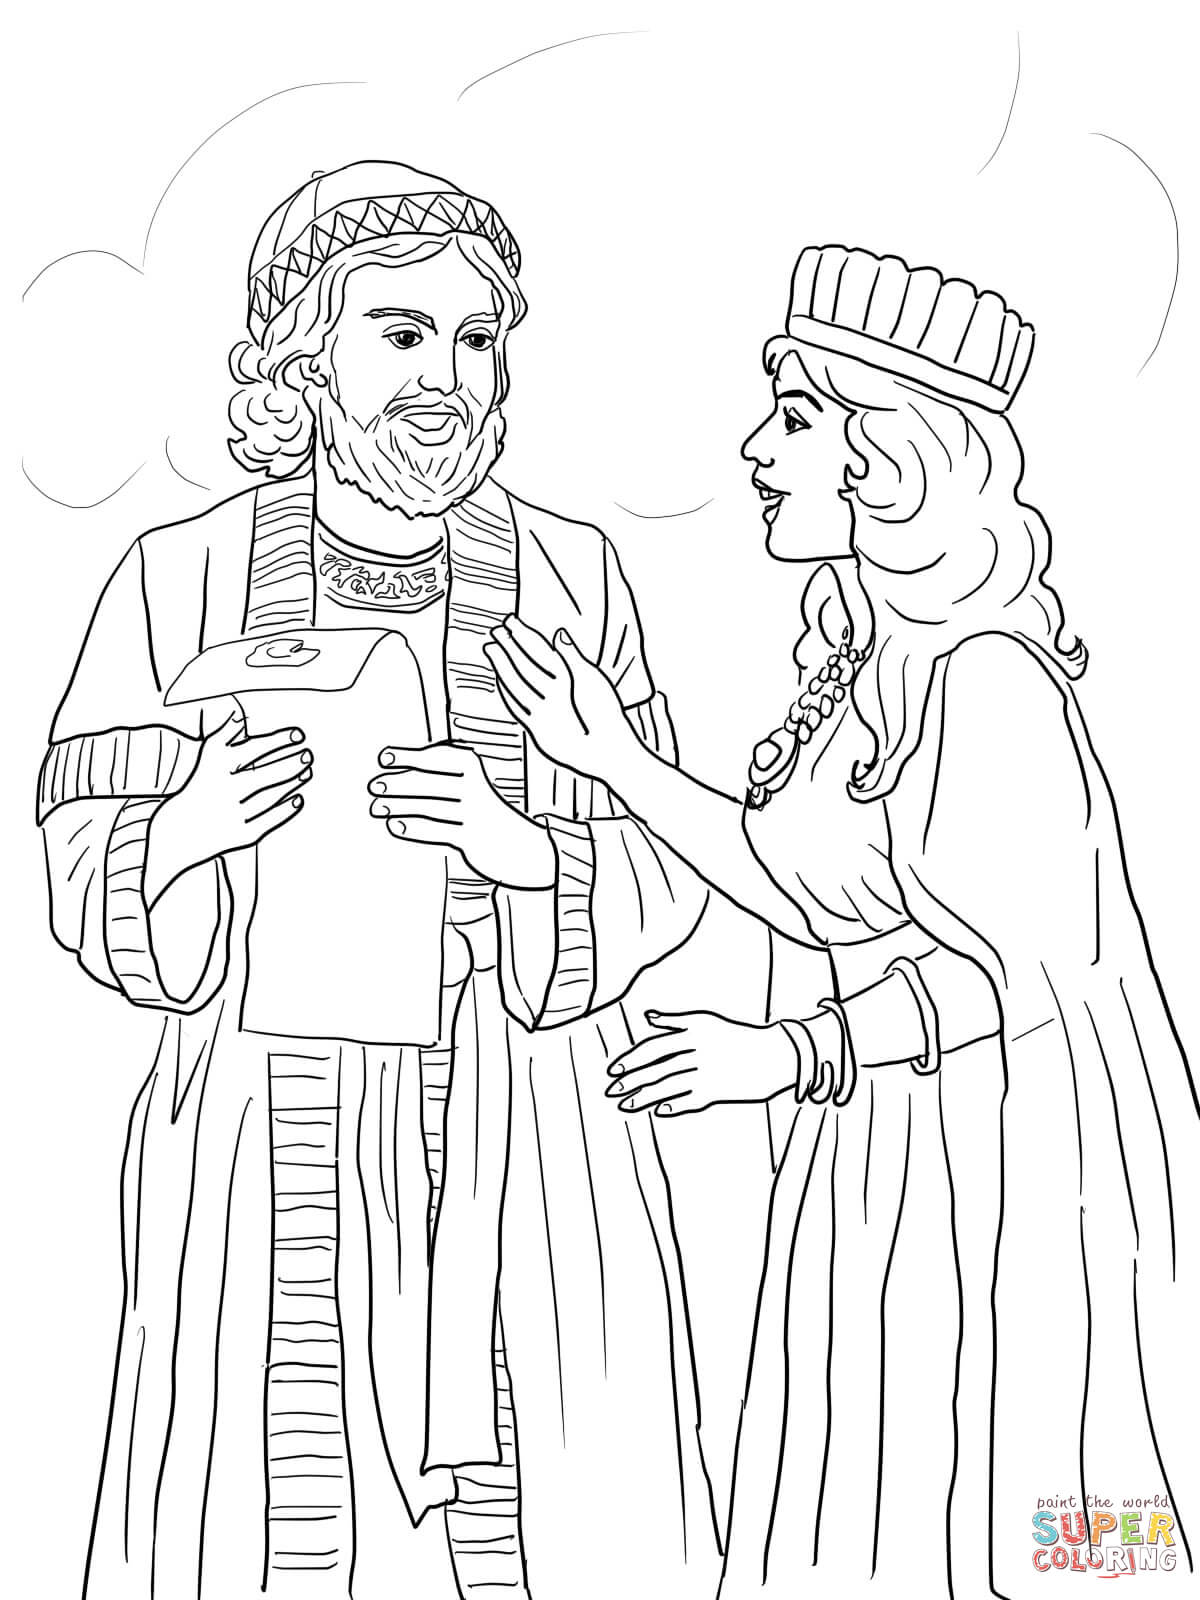 Free Coloring Pages Kings And Queens - Coloring Home